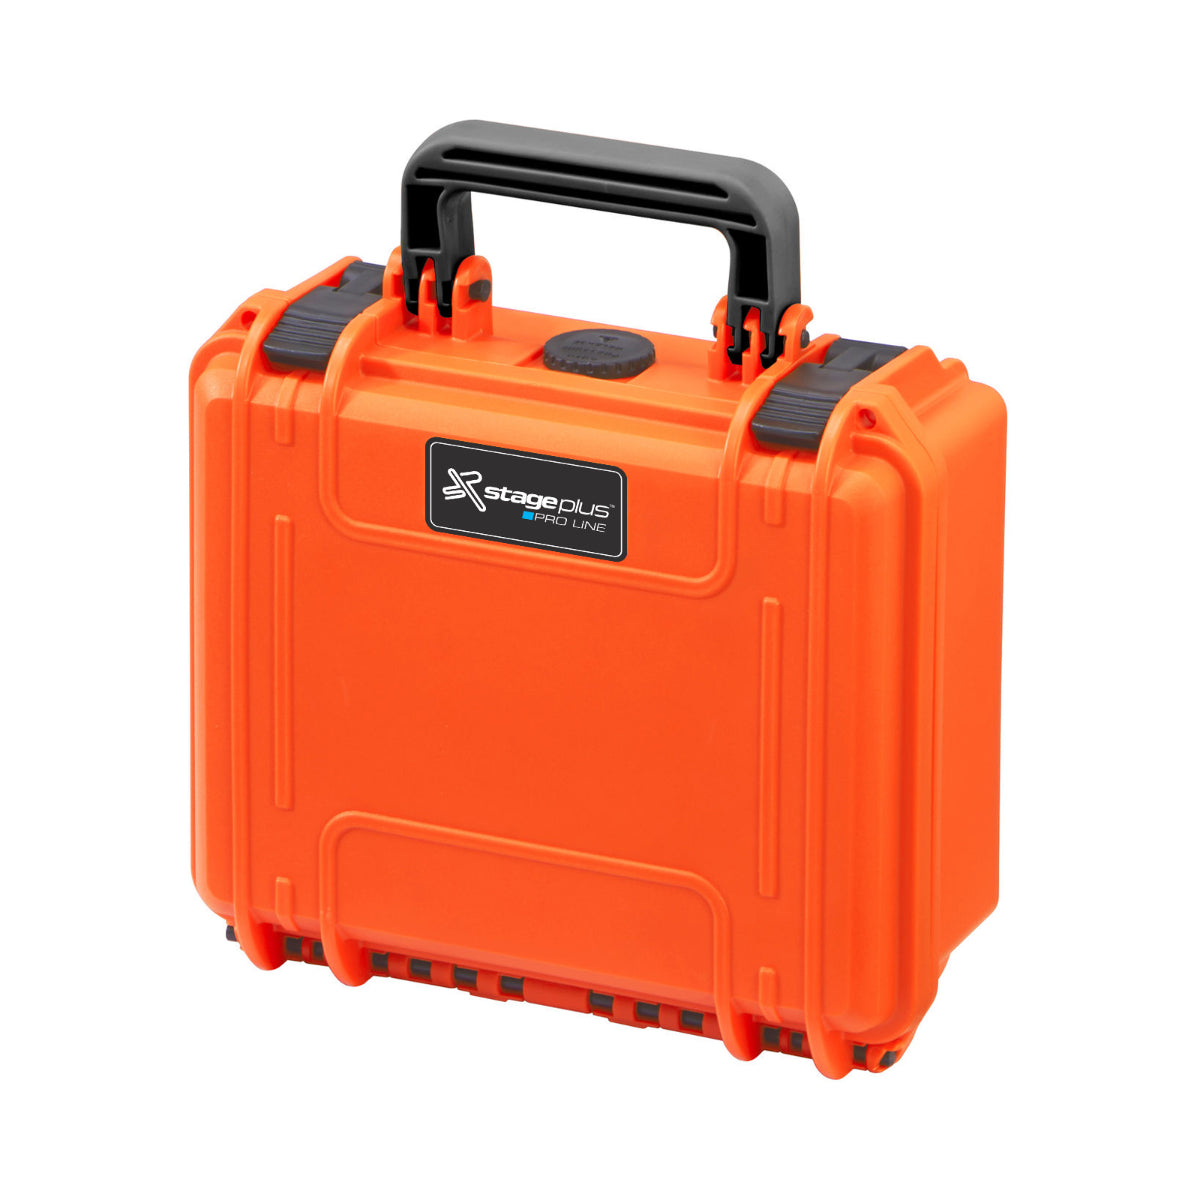 SP PRO 300CAM Orange Carry Case, Padded Dividers, ID: L300xW225xH132mm